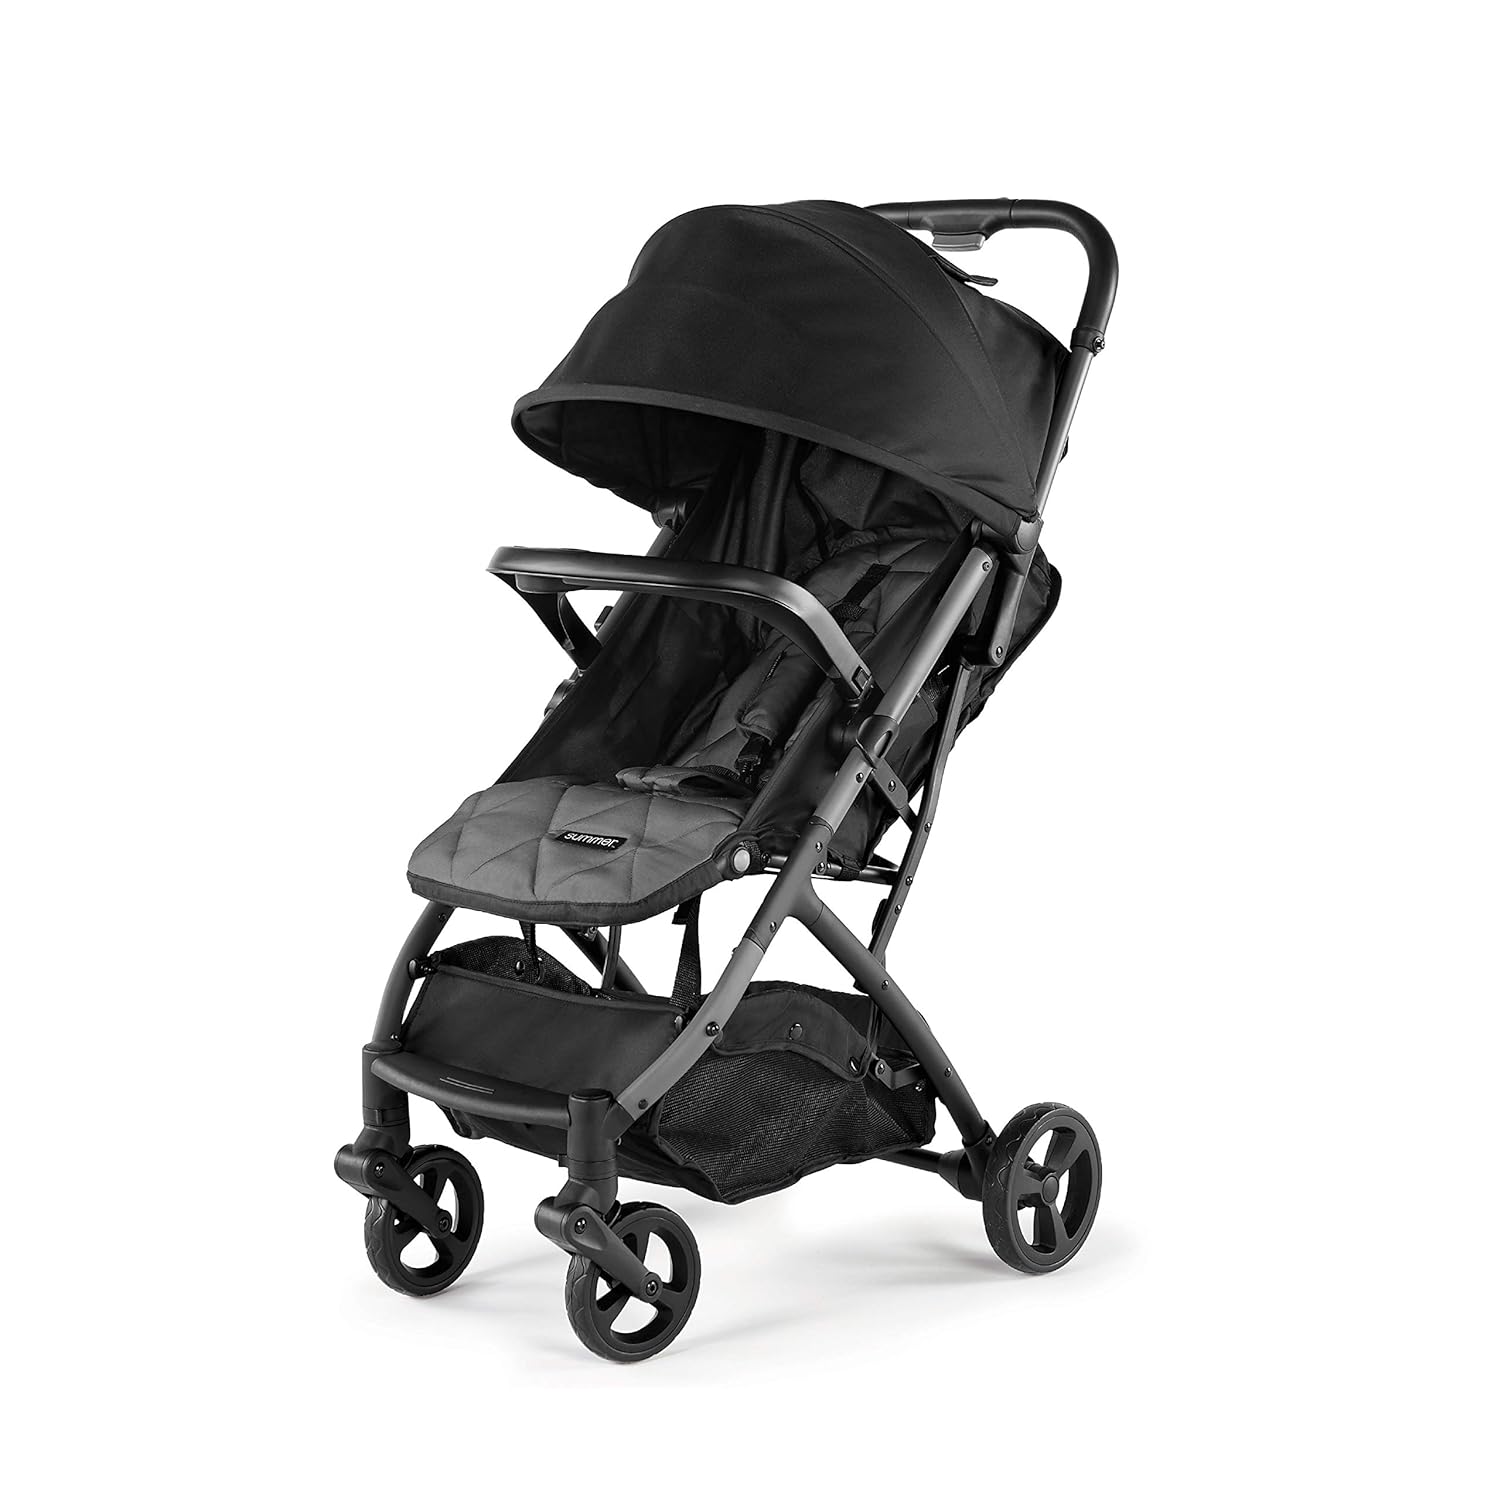 Summer Infant 3Dpac CS Compact Stroller Review